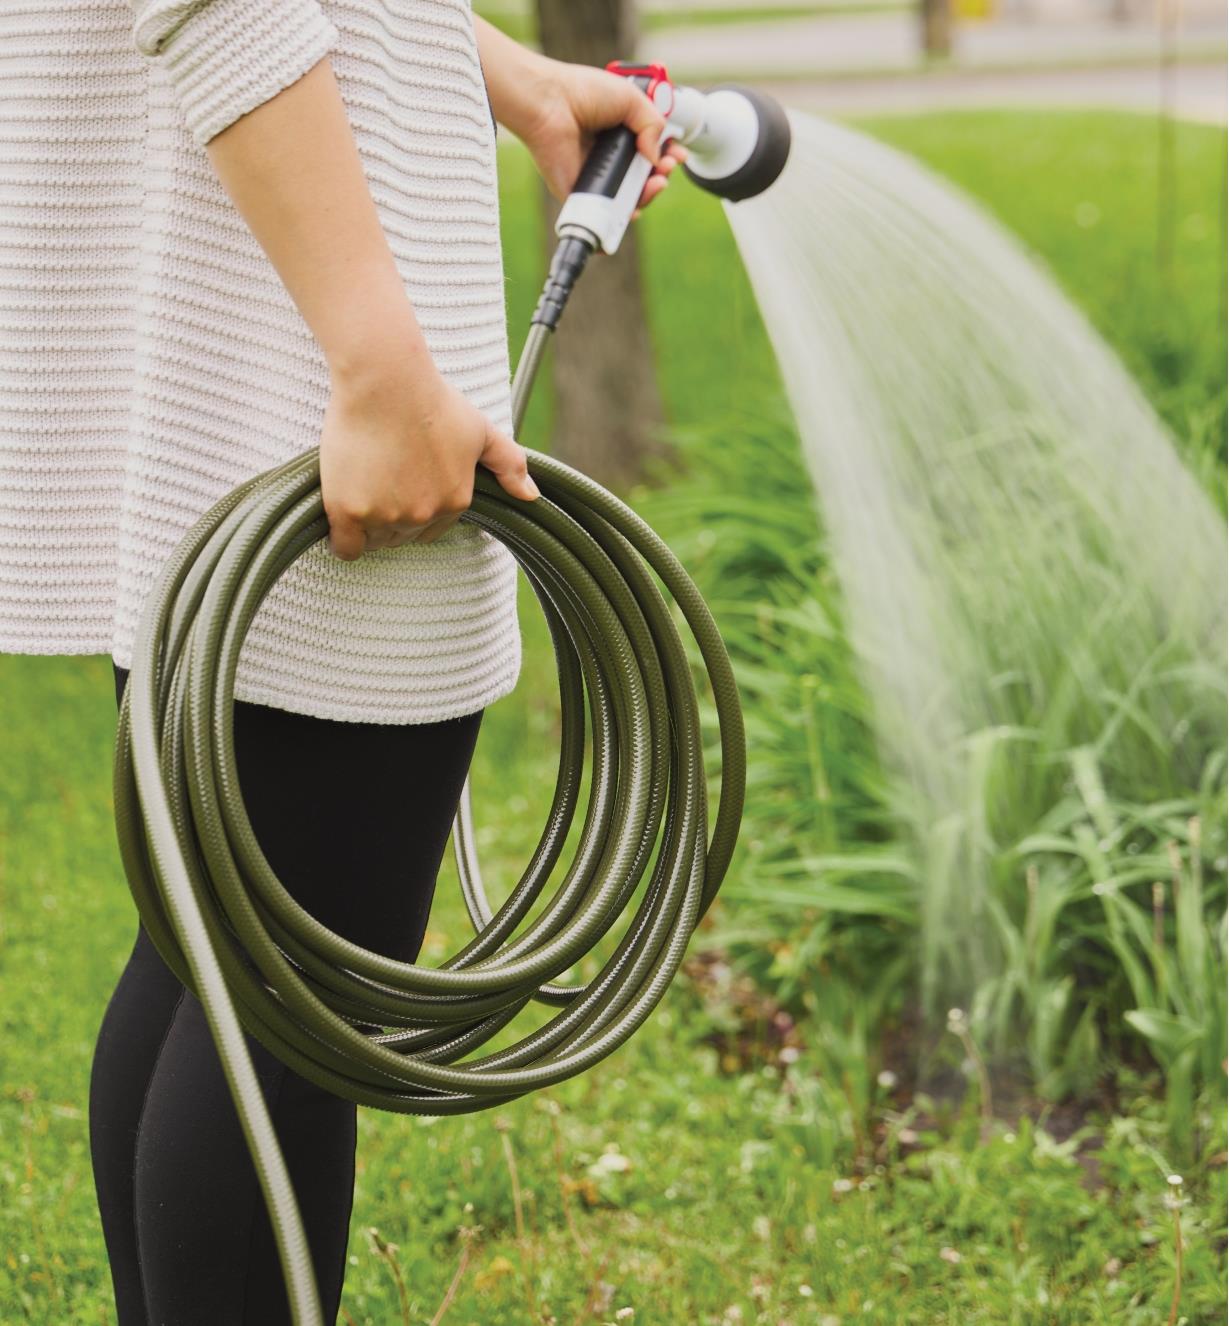 A person holds a coiled lightweight hose with attached sprayer while watering garden plants